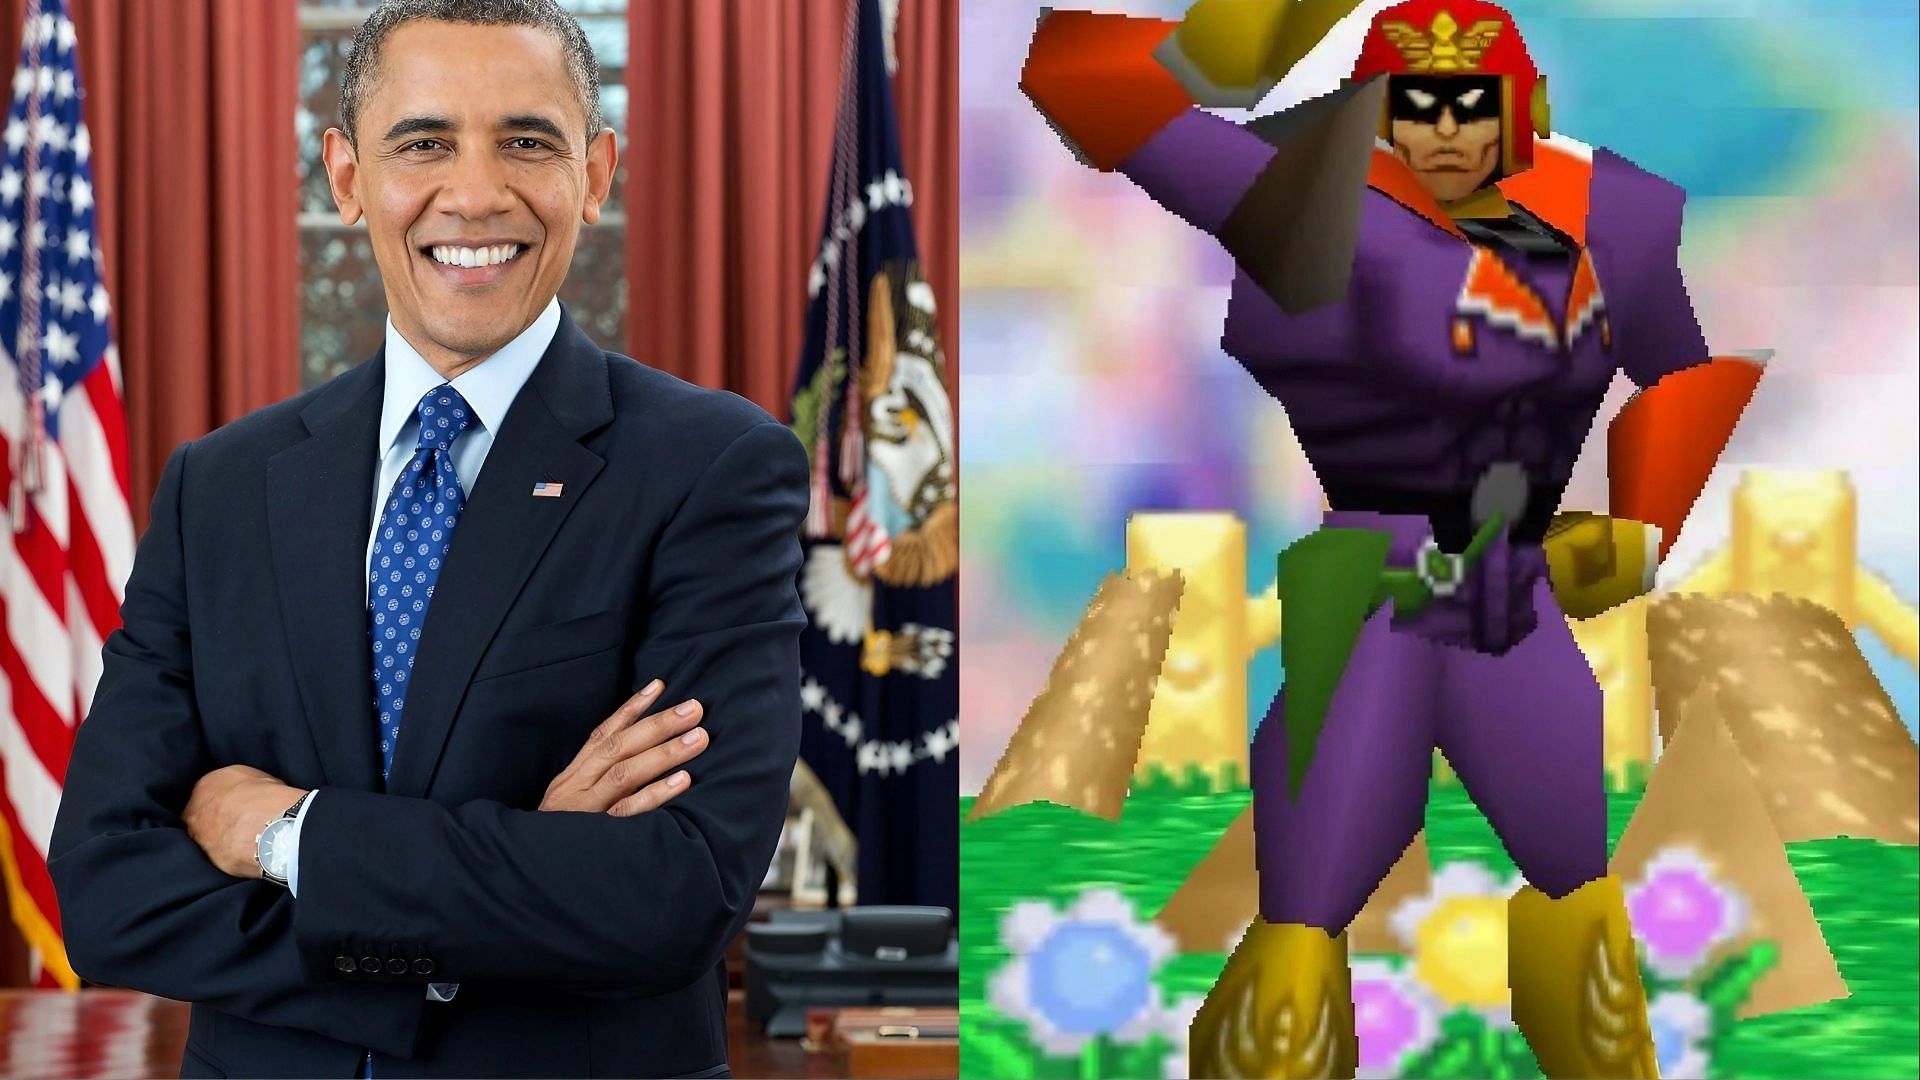 Image featuring Obama and Captain Falcon